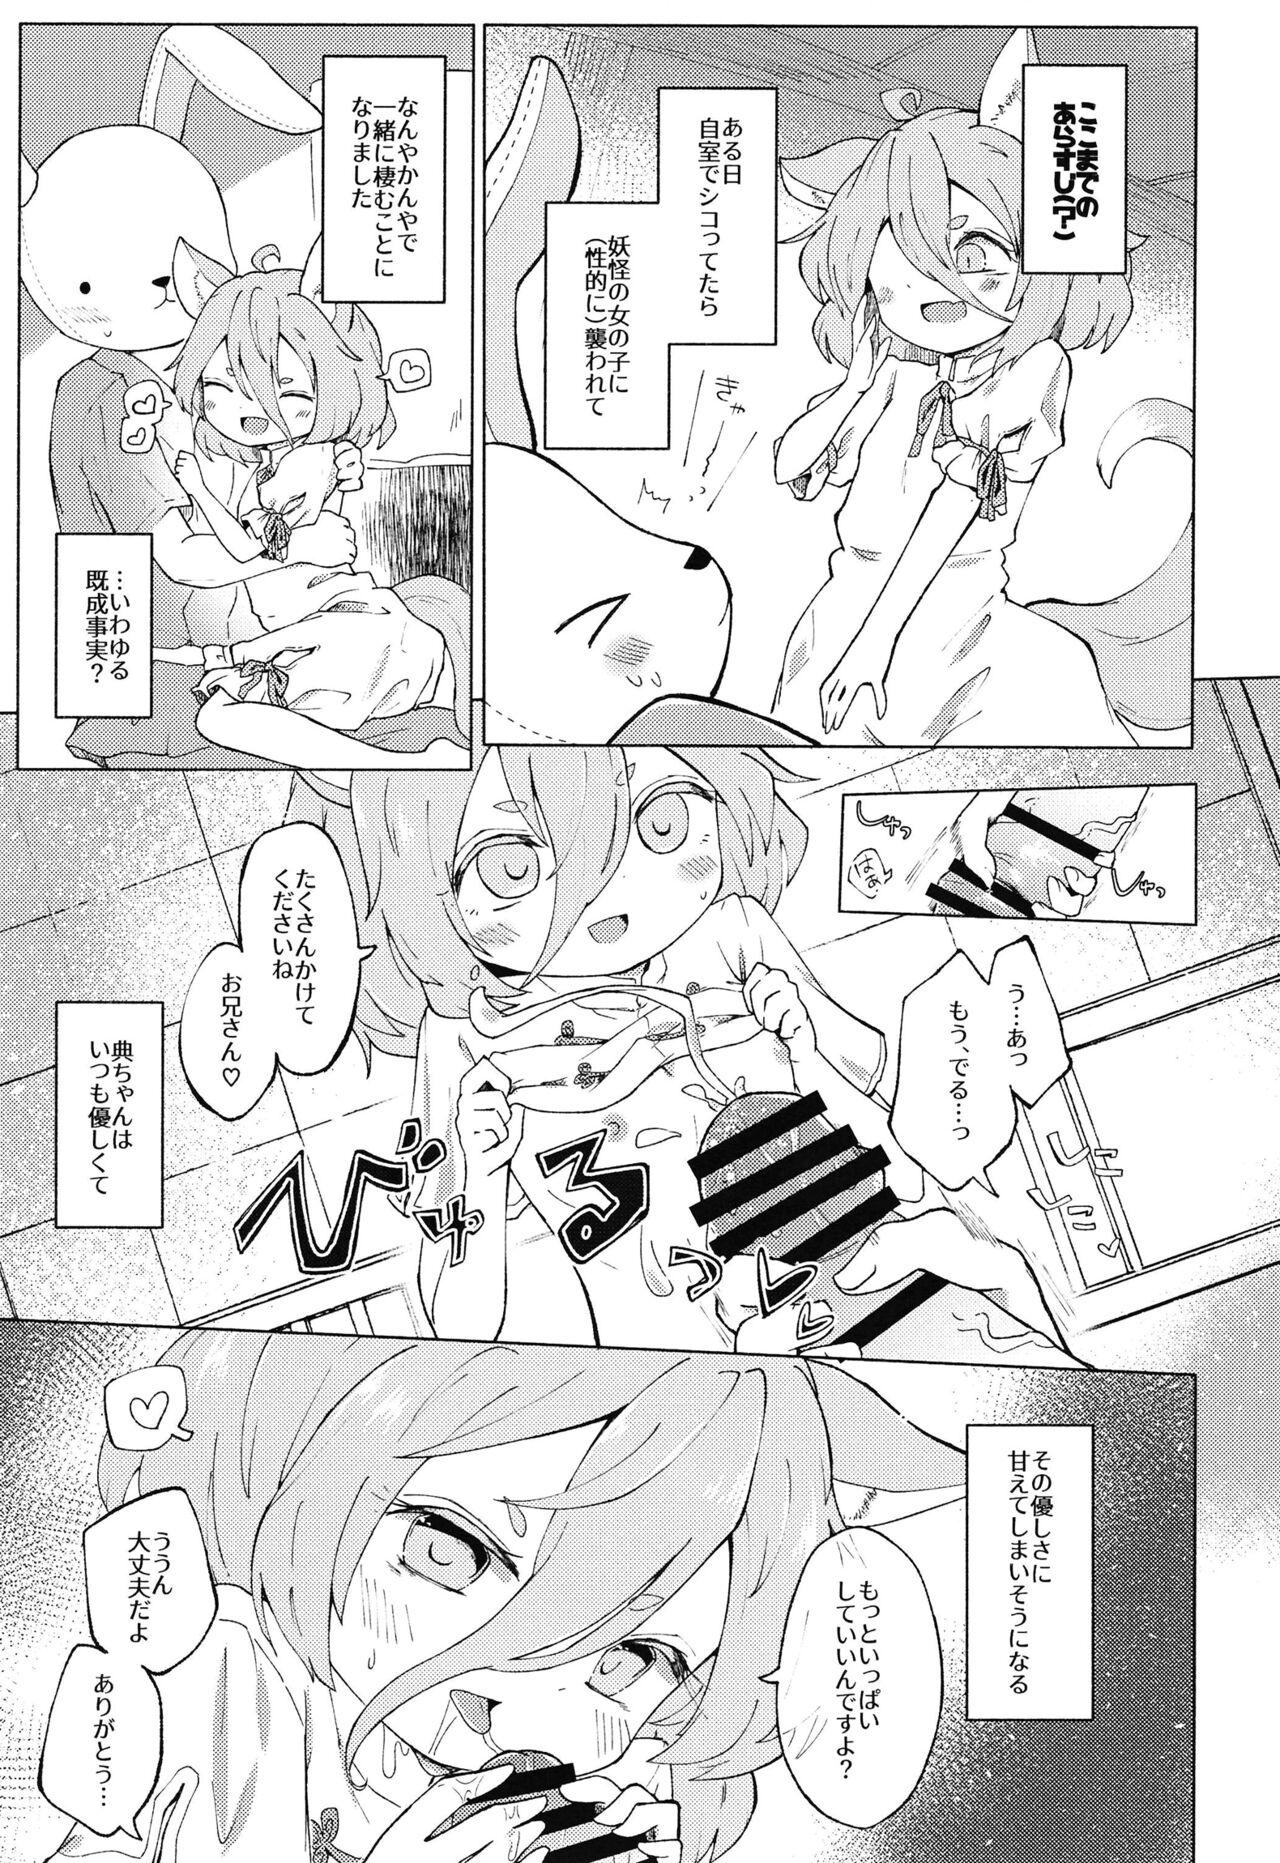 Squirting Heartblue na kimi to. - Touhou project Xxx - Page 3